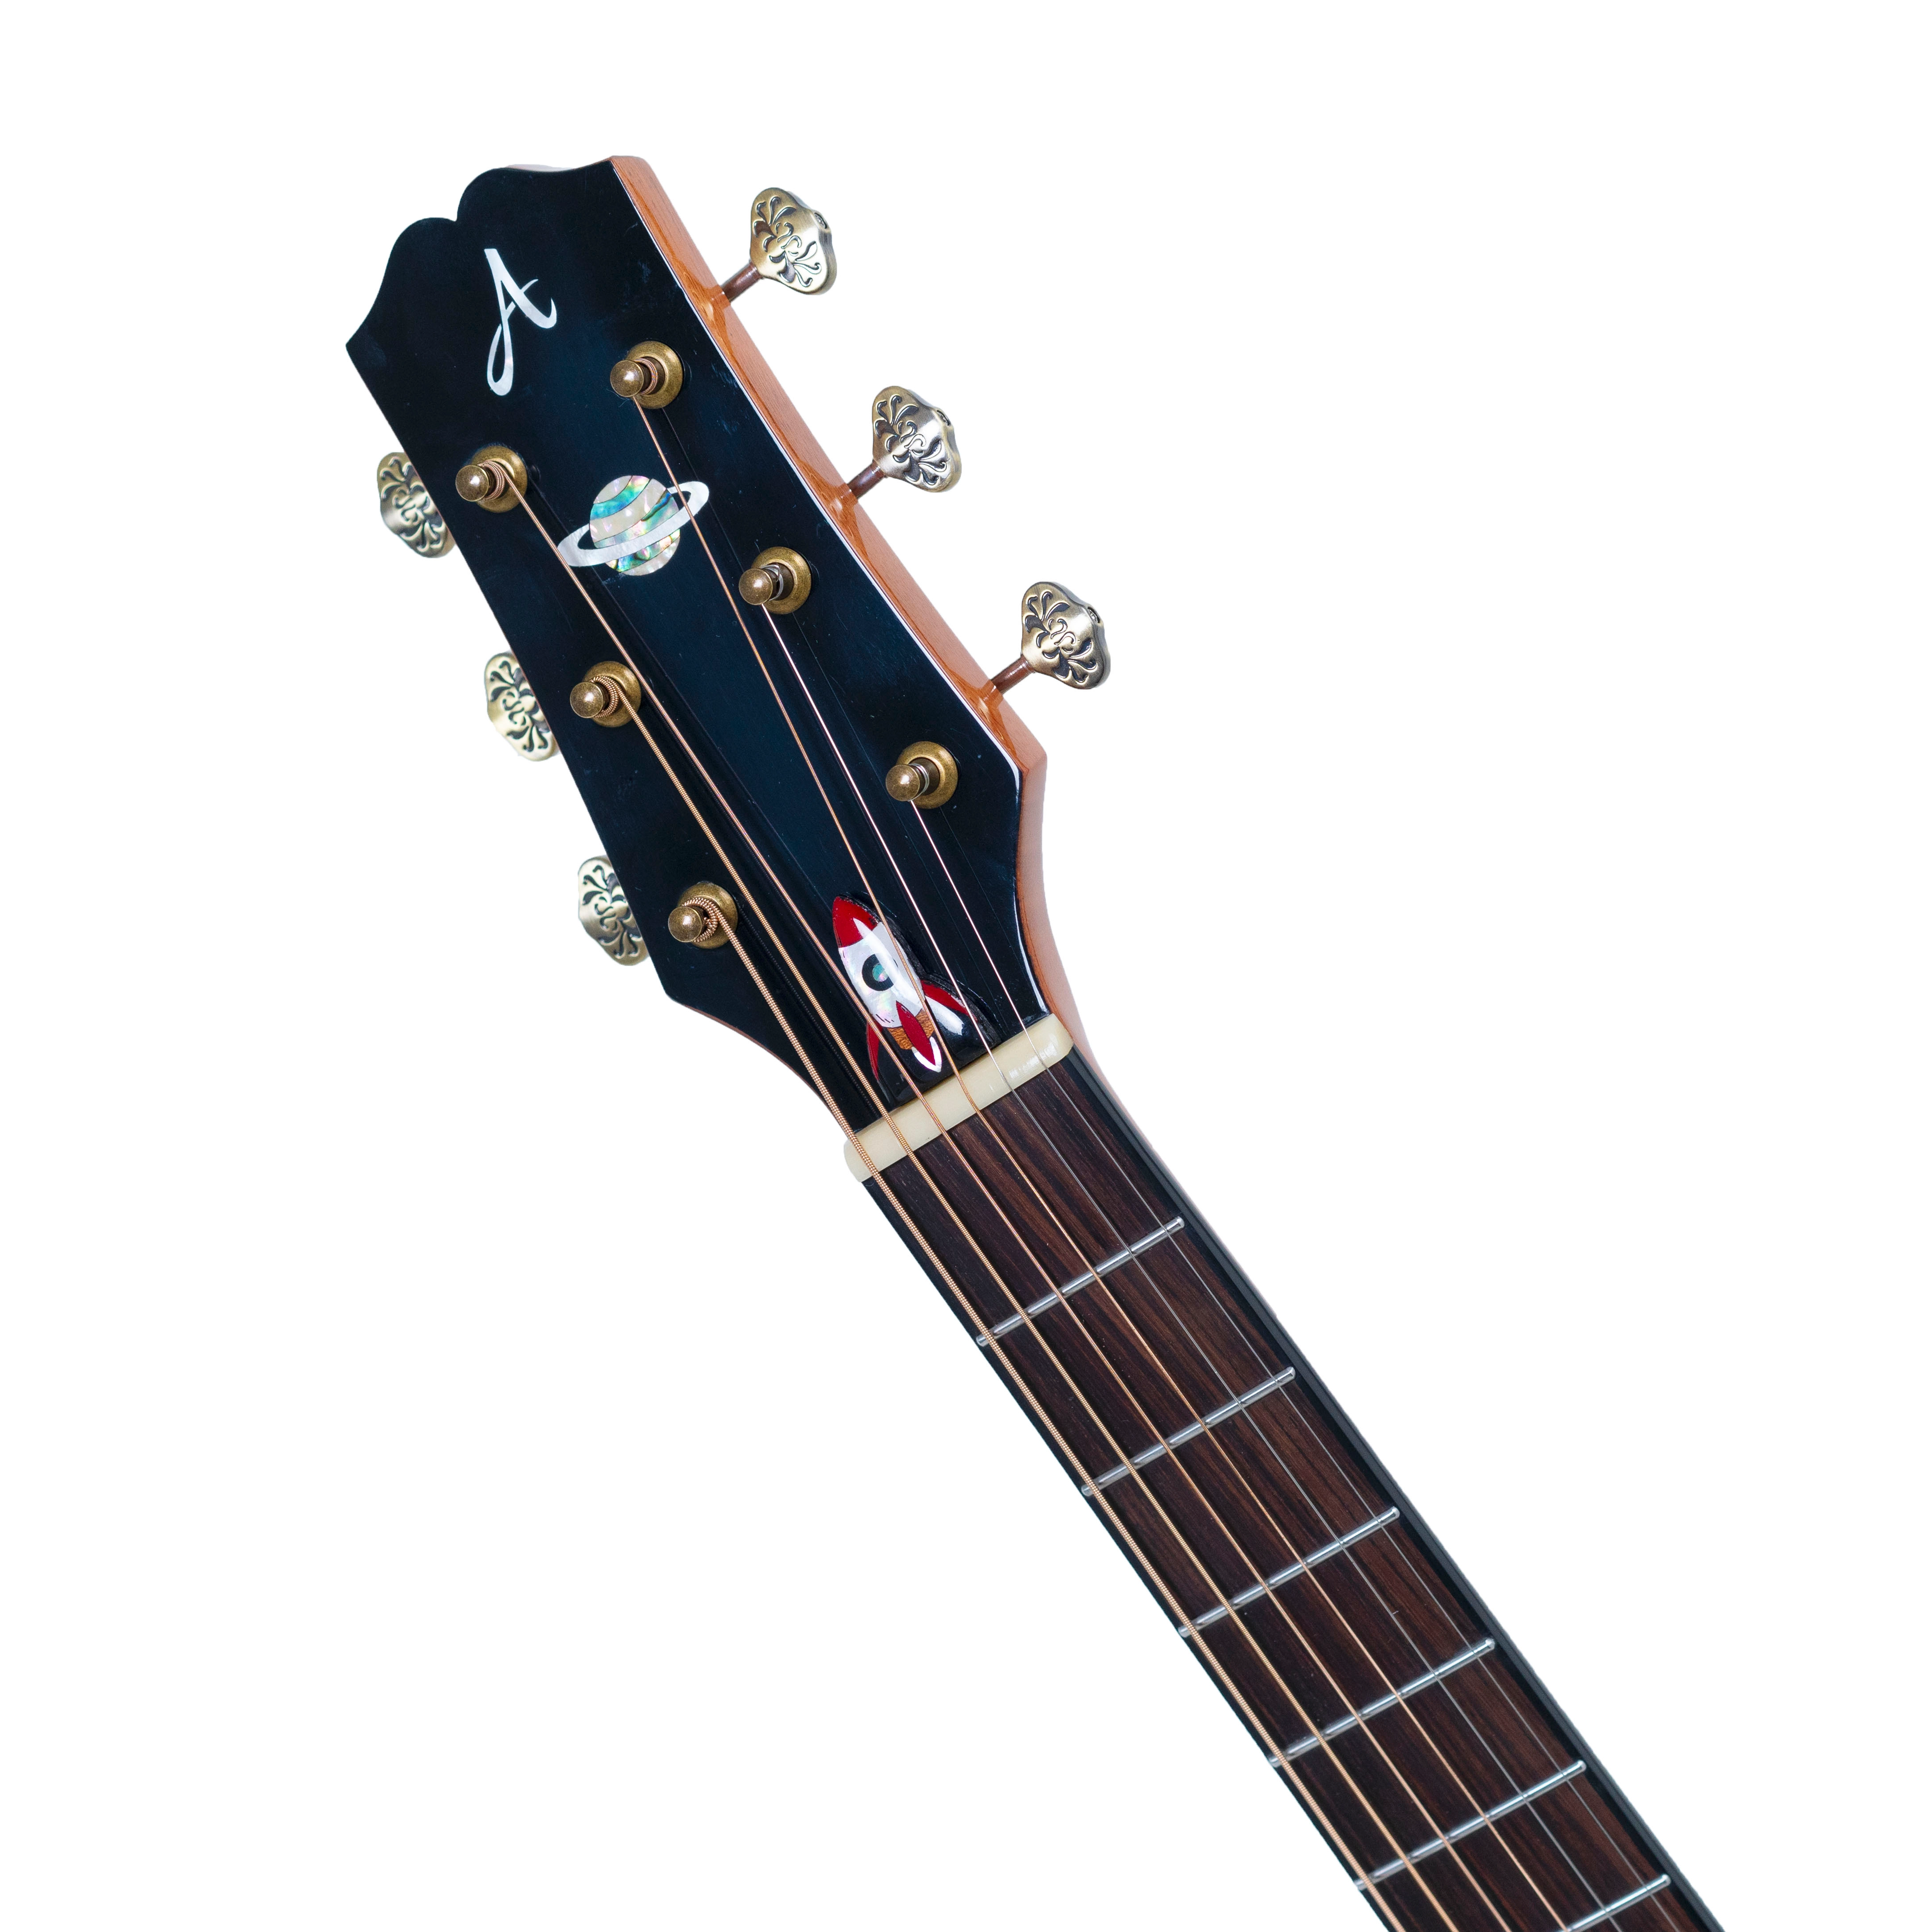 AOSEN M-8: Kid\'s Exploration top solid acoustic guitar, to start the journey of folk music